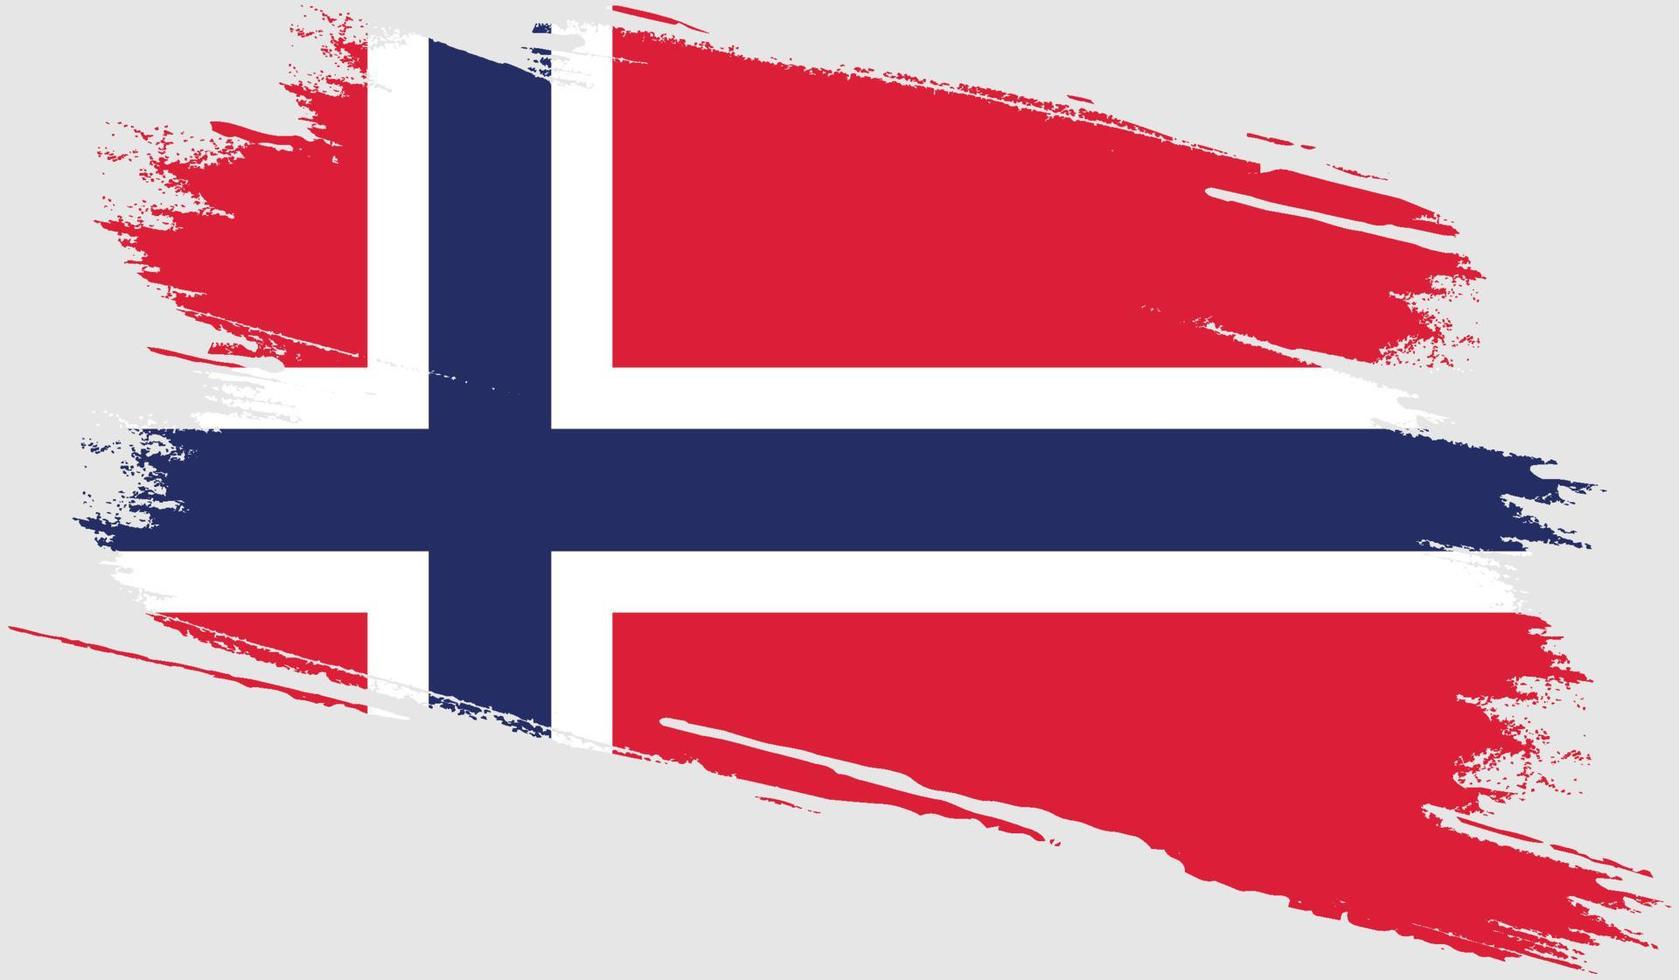 Norway flag with grunge texture vector